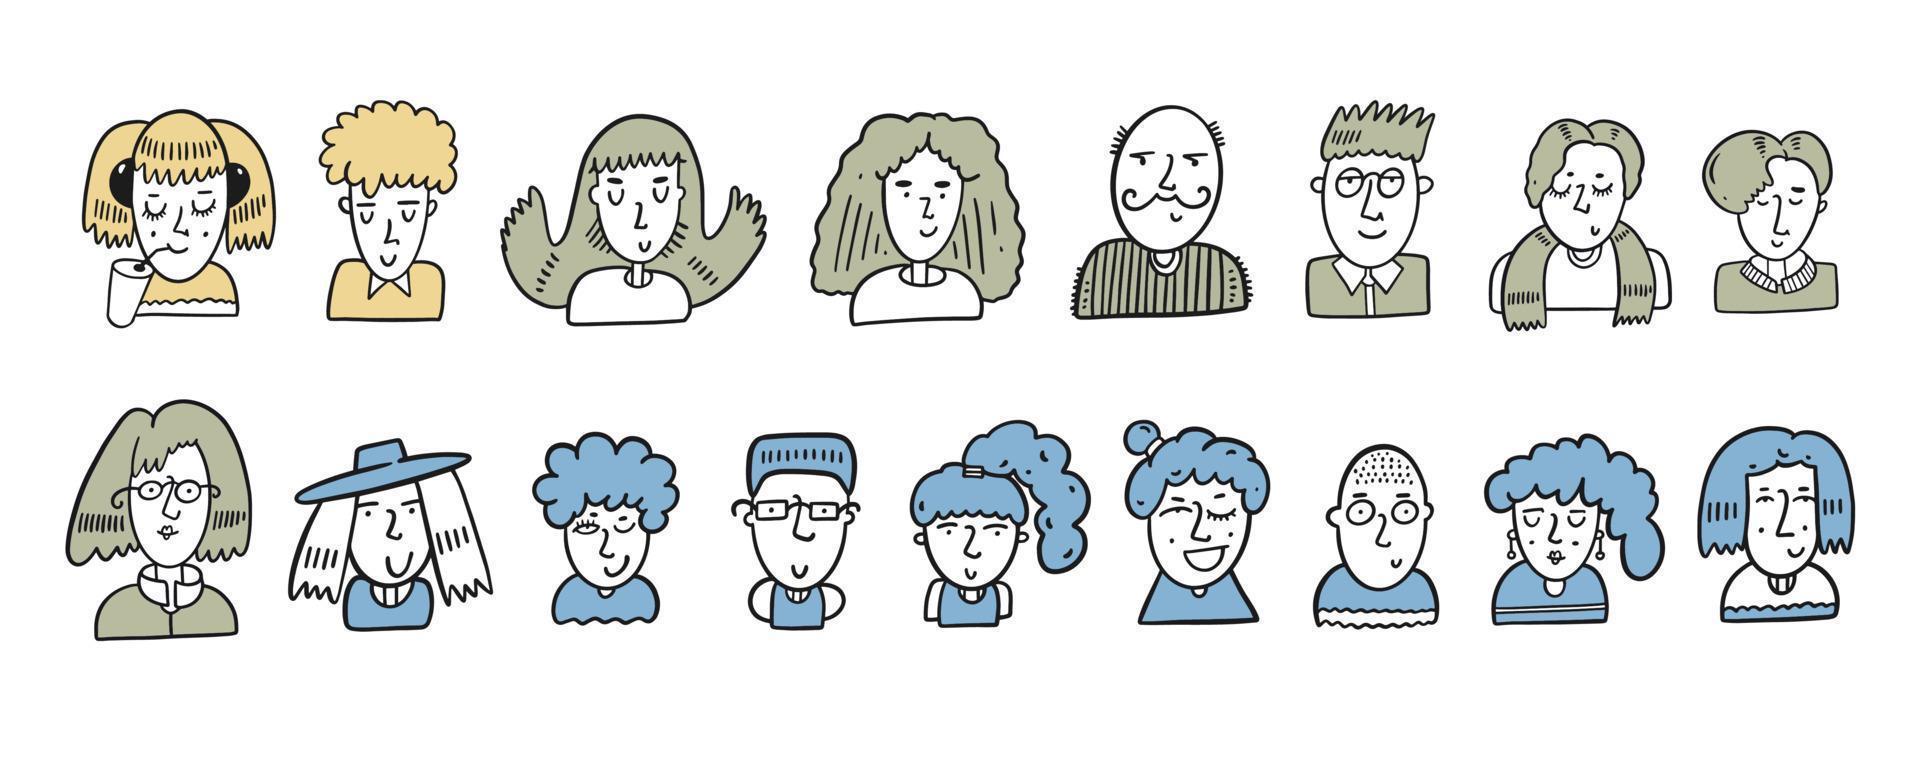 Doodle faces people set. Outline hand drawn cartoon style vector illustration.